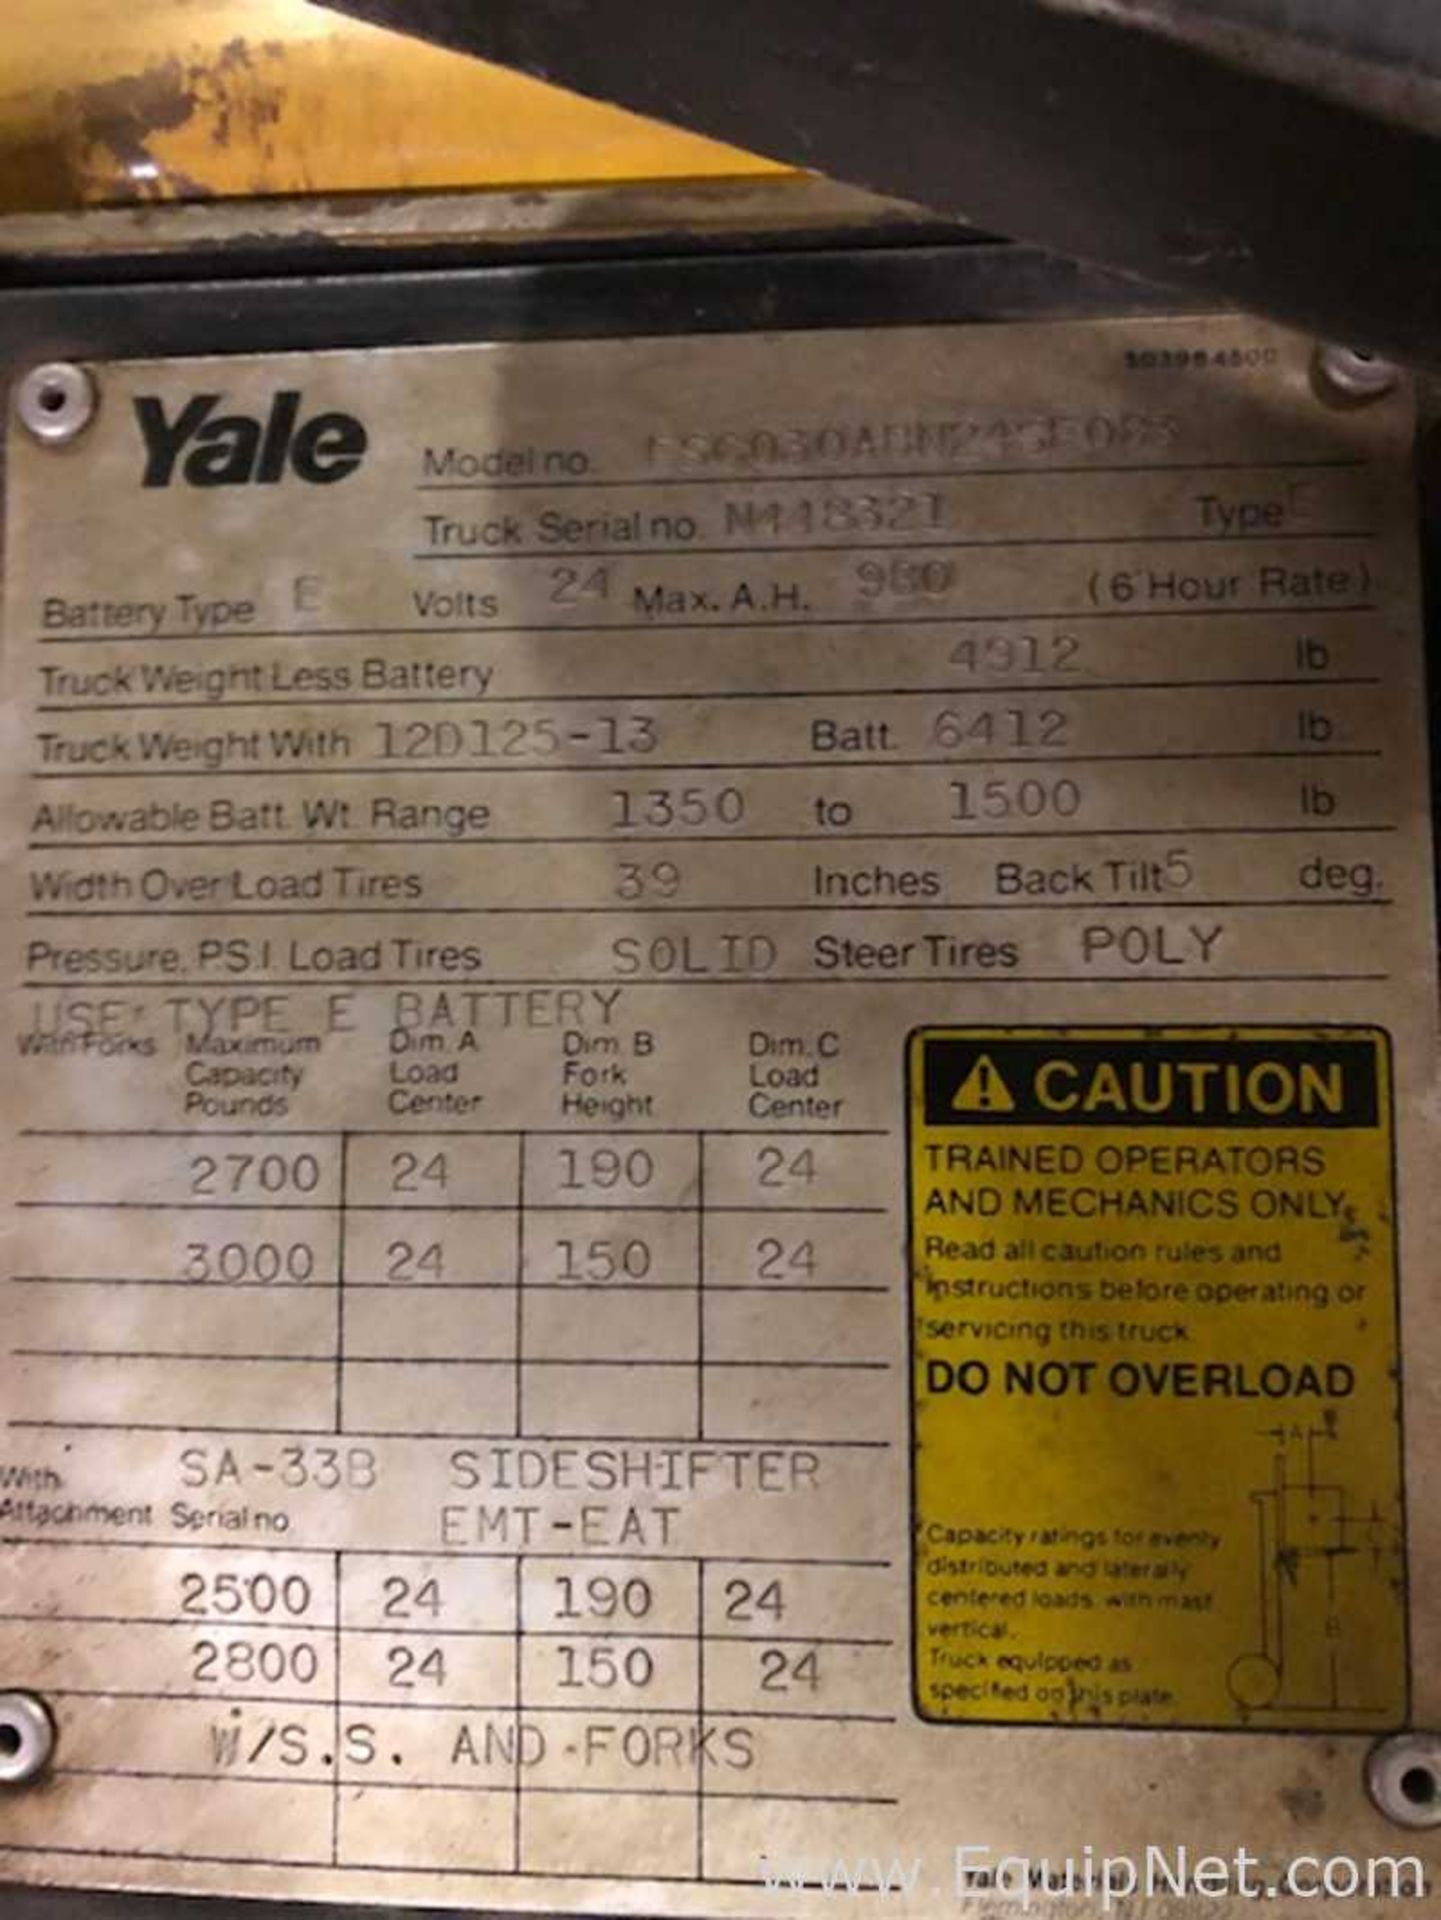 Yale ESC030AB 3,000 Pound Stand Electric Up Fork Lift - Image 2 of 2